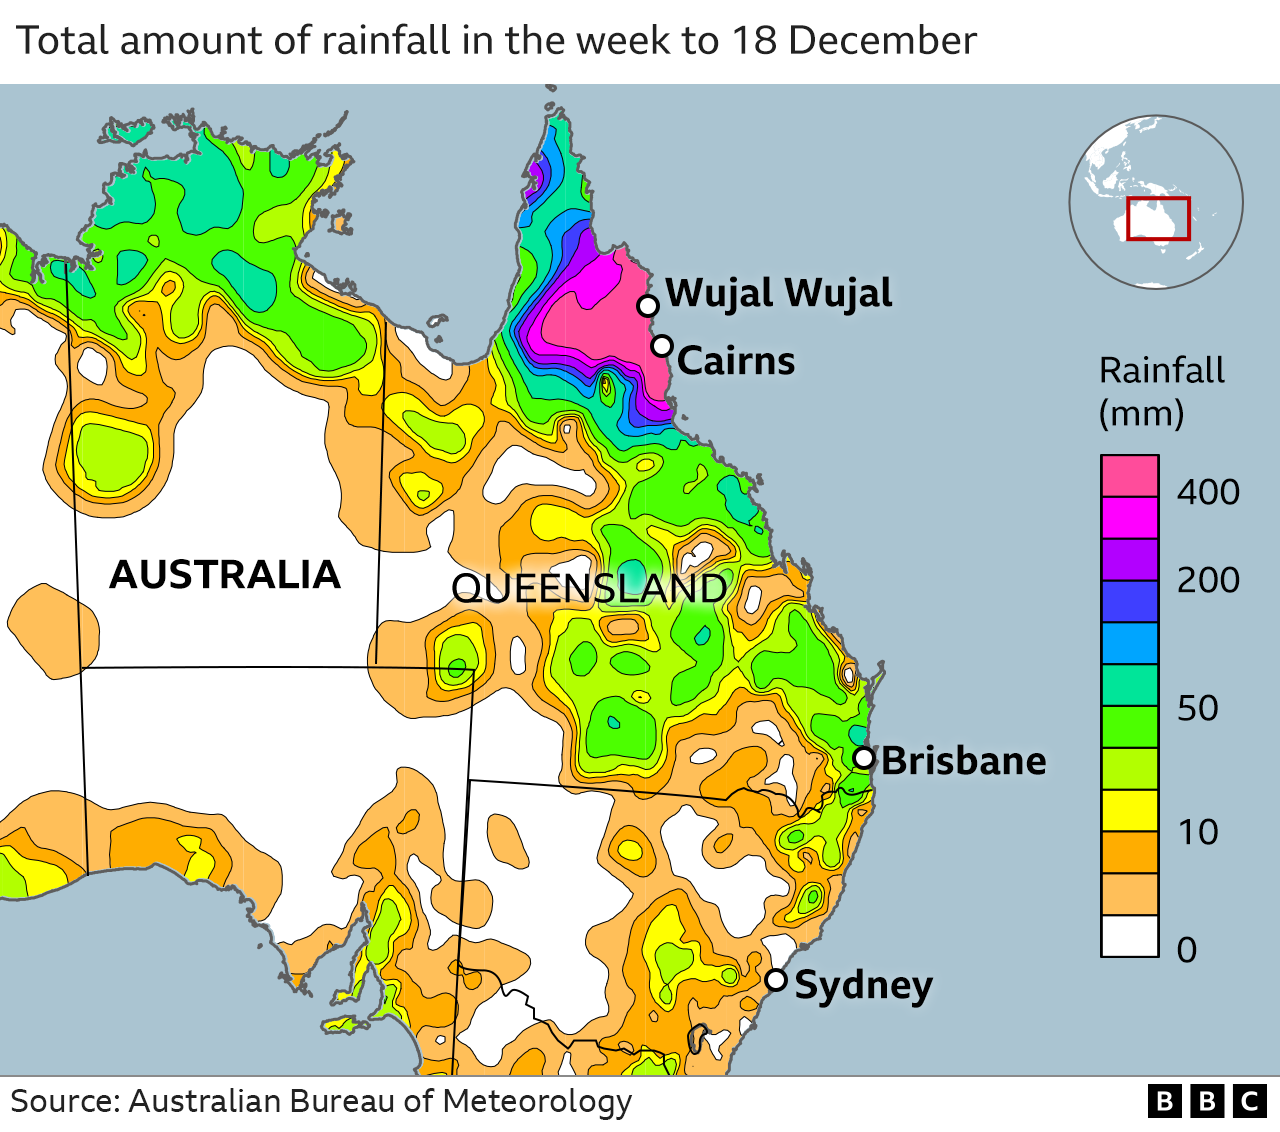 A BBC map shows the total amount of rainfall received in north Queensland in the week to 18 December, with highs of 400mm received around Cairns and Wujal Wujal